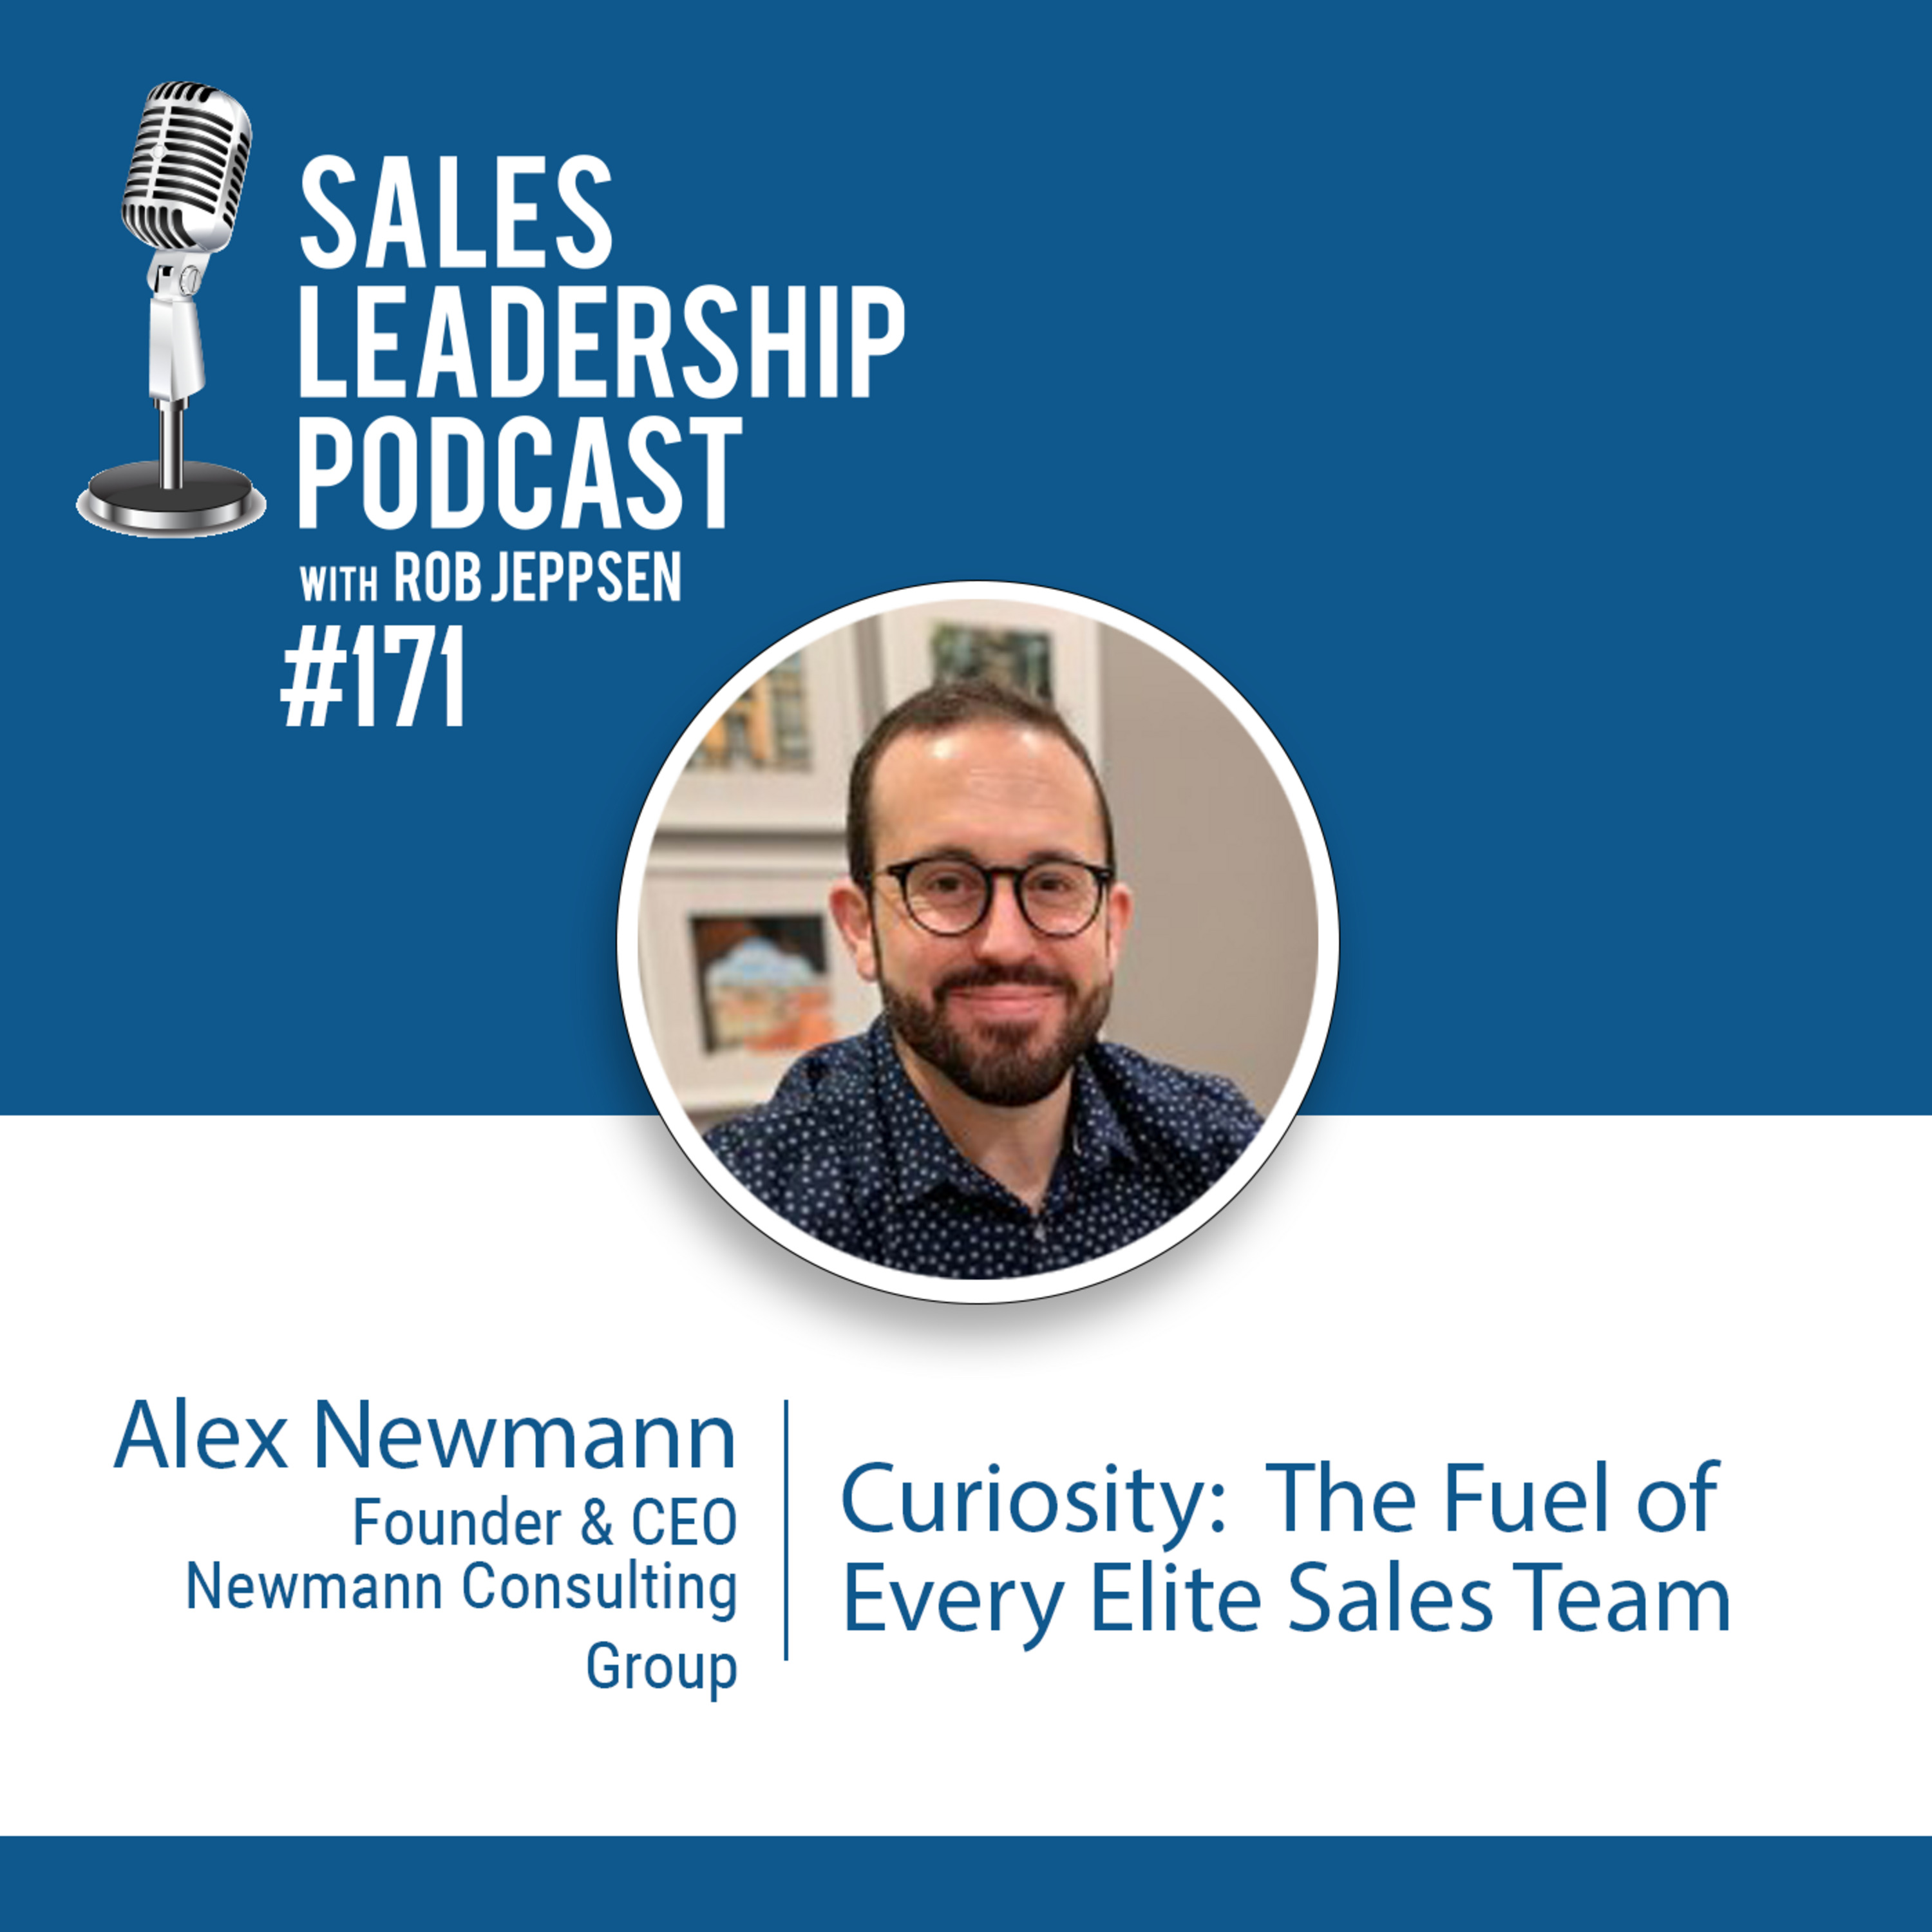 Episode 172: #171: Alex Newmann of Newmann Consulting Group — Curiosity:  The Fuel of Every Elite Sales Team